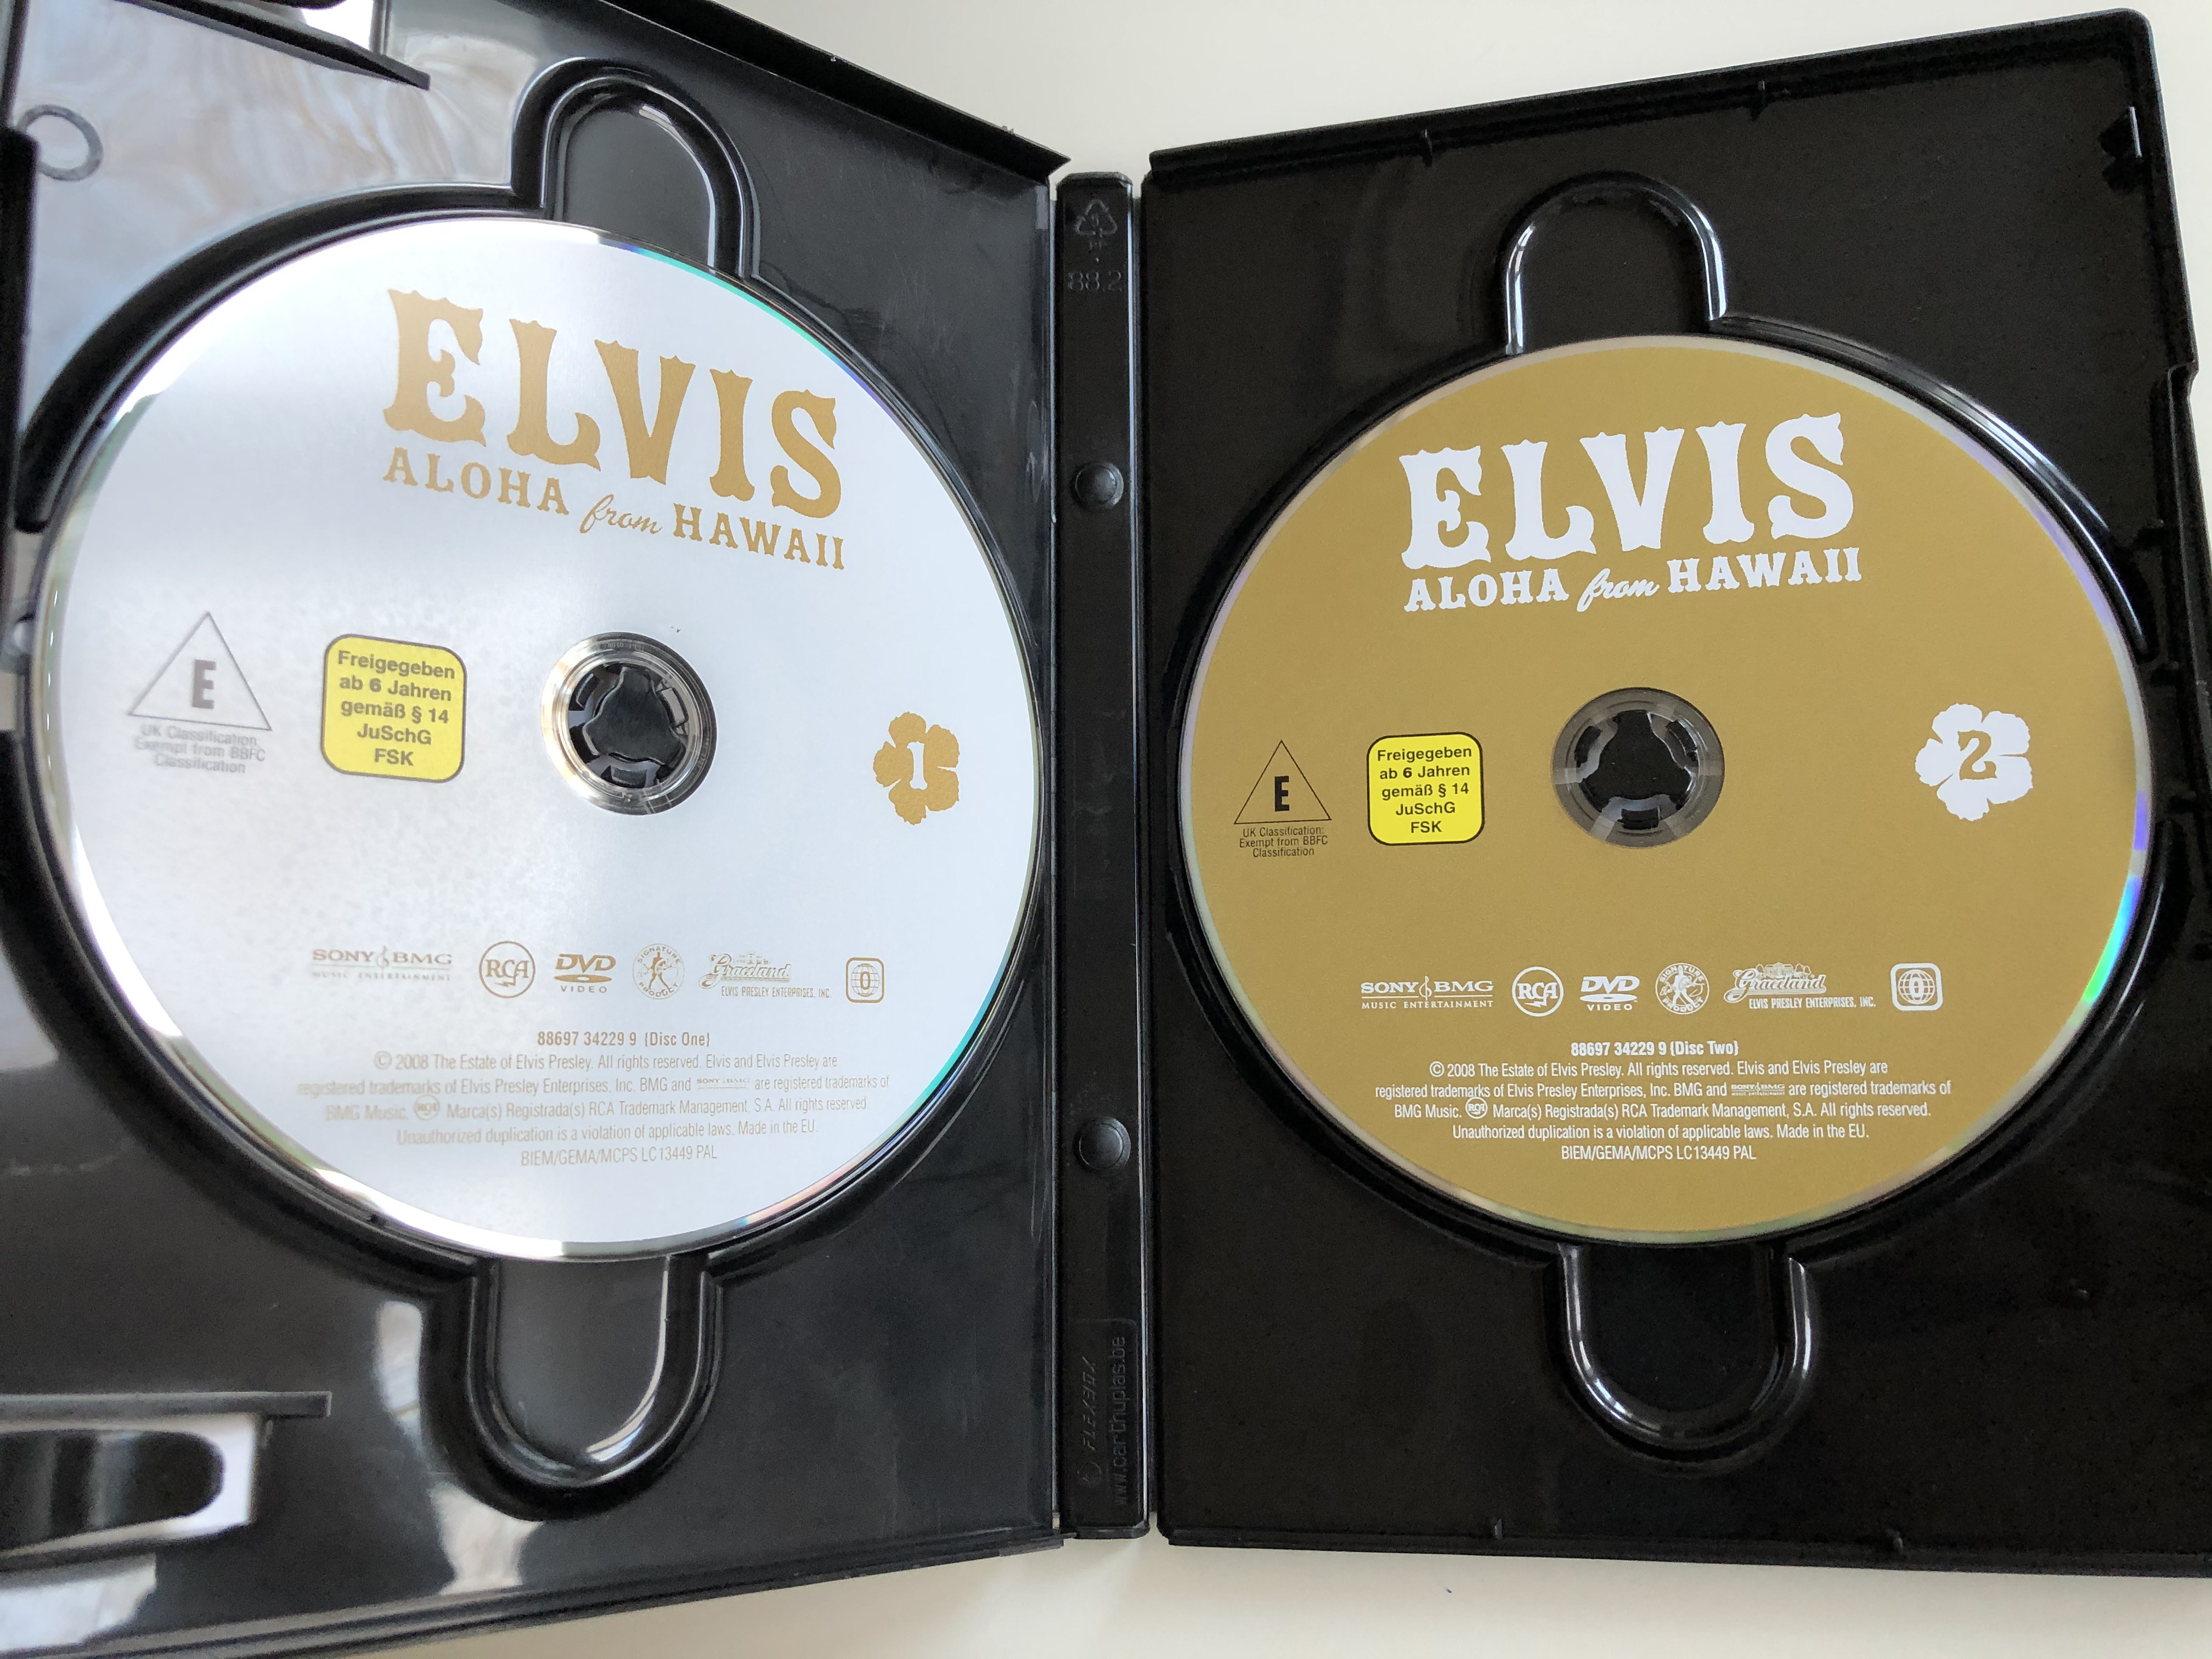 Elvis Aloha From Hawaii 2 Dvd Deluxe Edition 04 2x Dvd Set Bmg Over 4 Hours Of Video Elvis Presley Previously Unseen Material Bibleinmylanguage